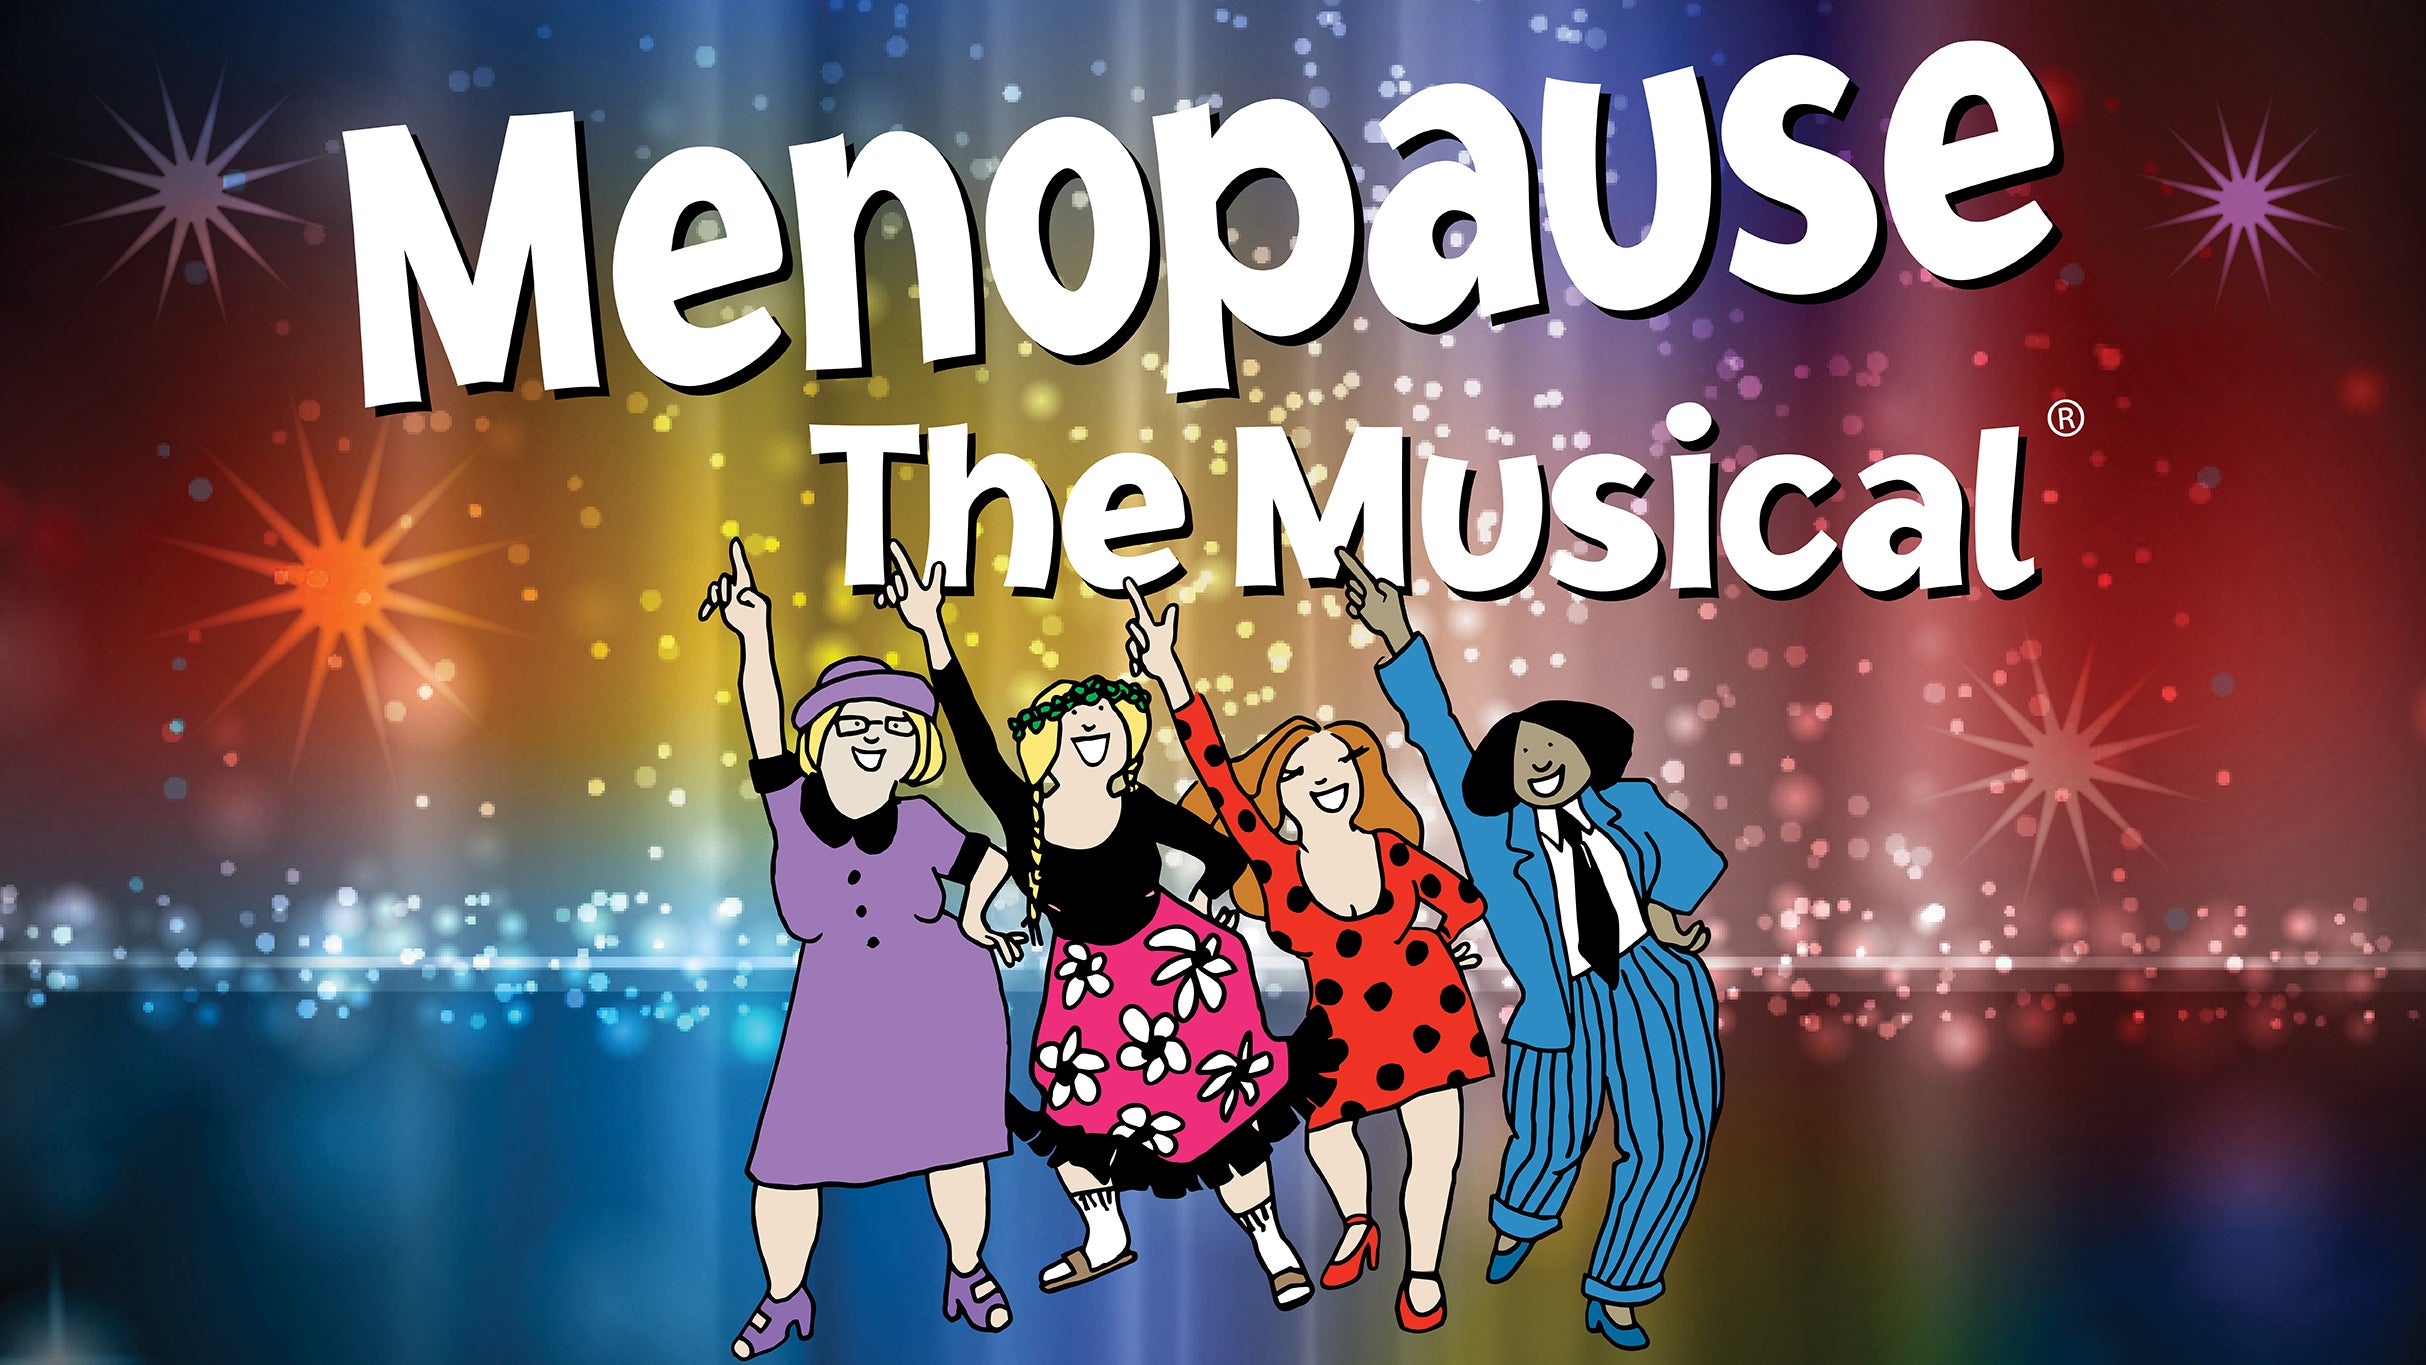 Menopause the Musical at Classic Center Theatre